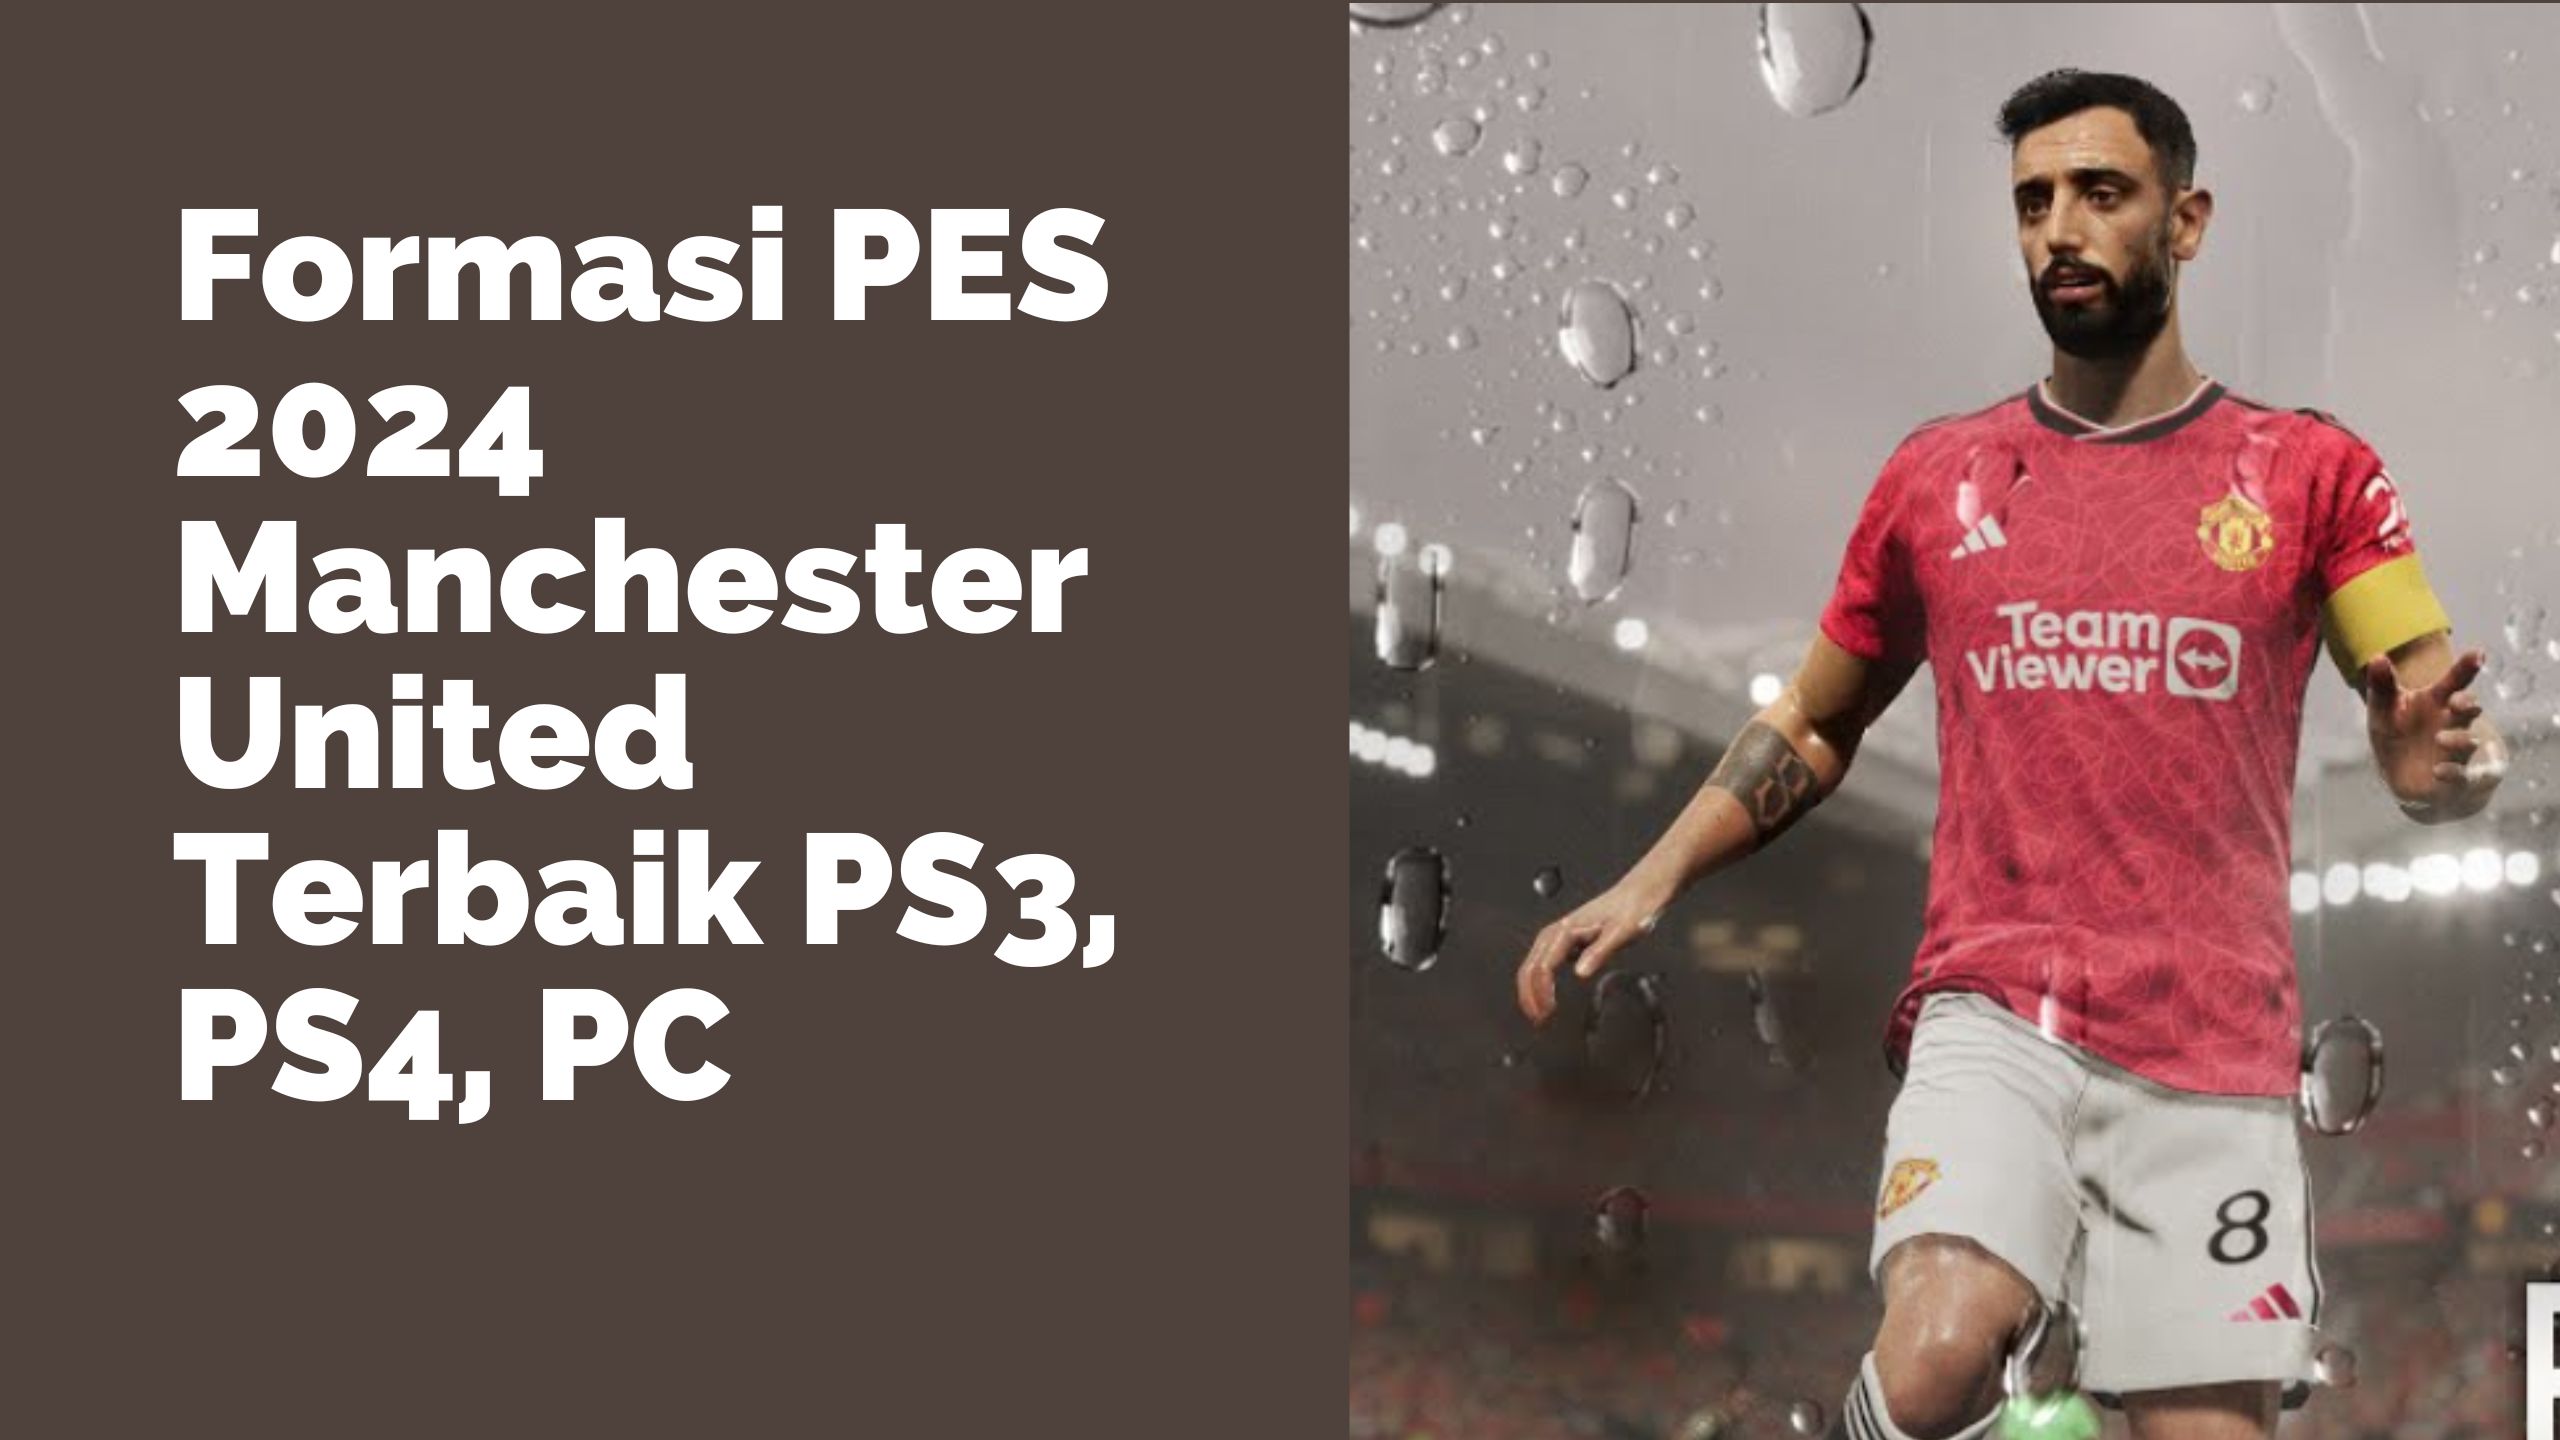 Formasi PES 2024 Manchester United